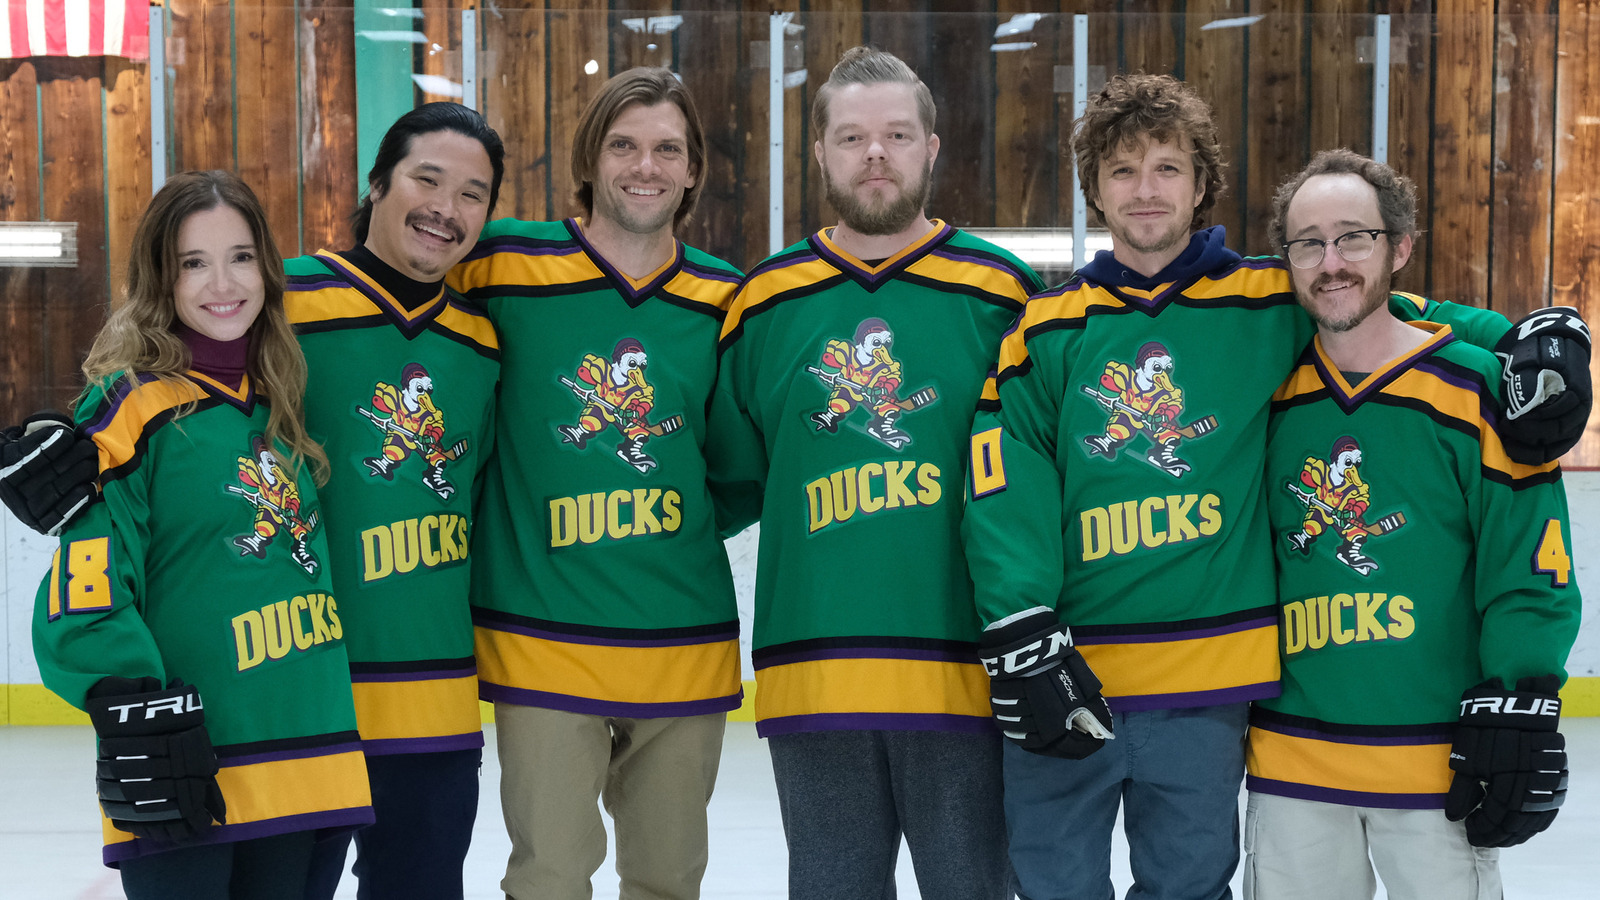 'The Mighty Ducks Game Changers' Reveals The Return Of Some Original Franchise Ducks